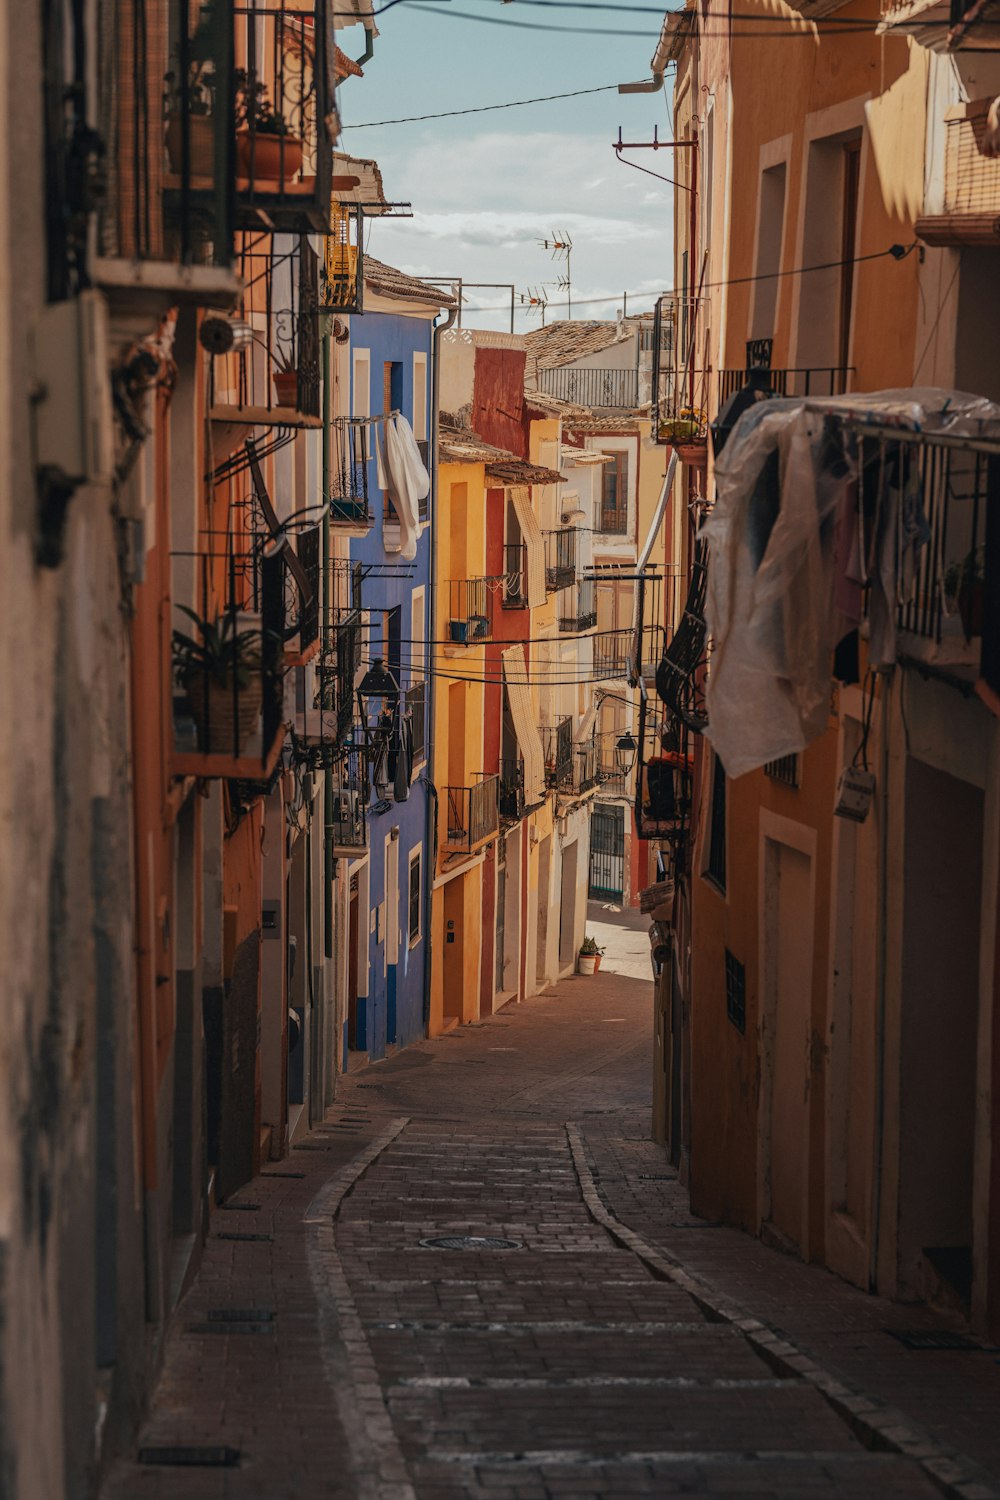 a narrow alley way with clothes hanging out to dry